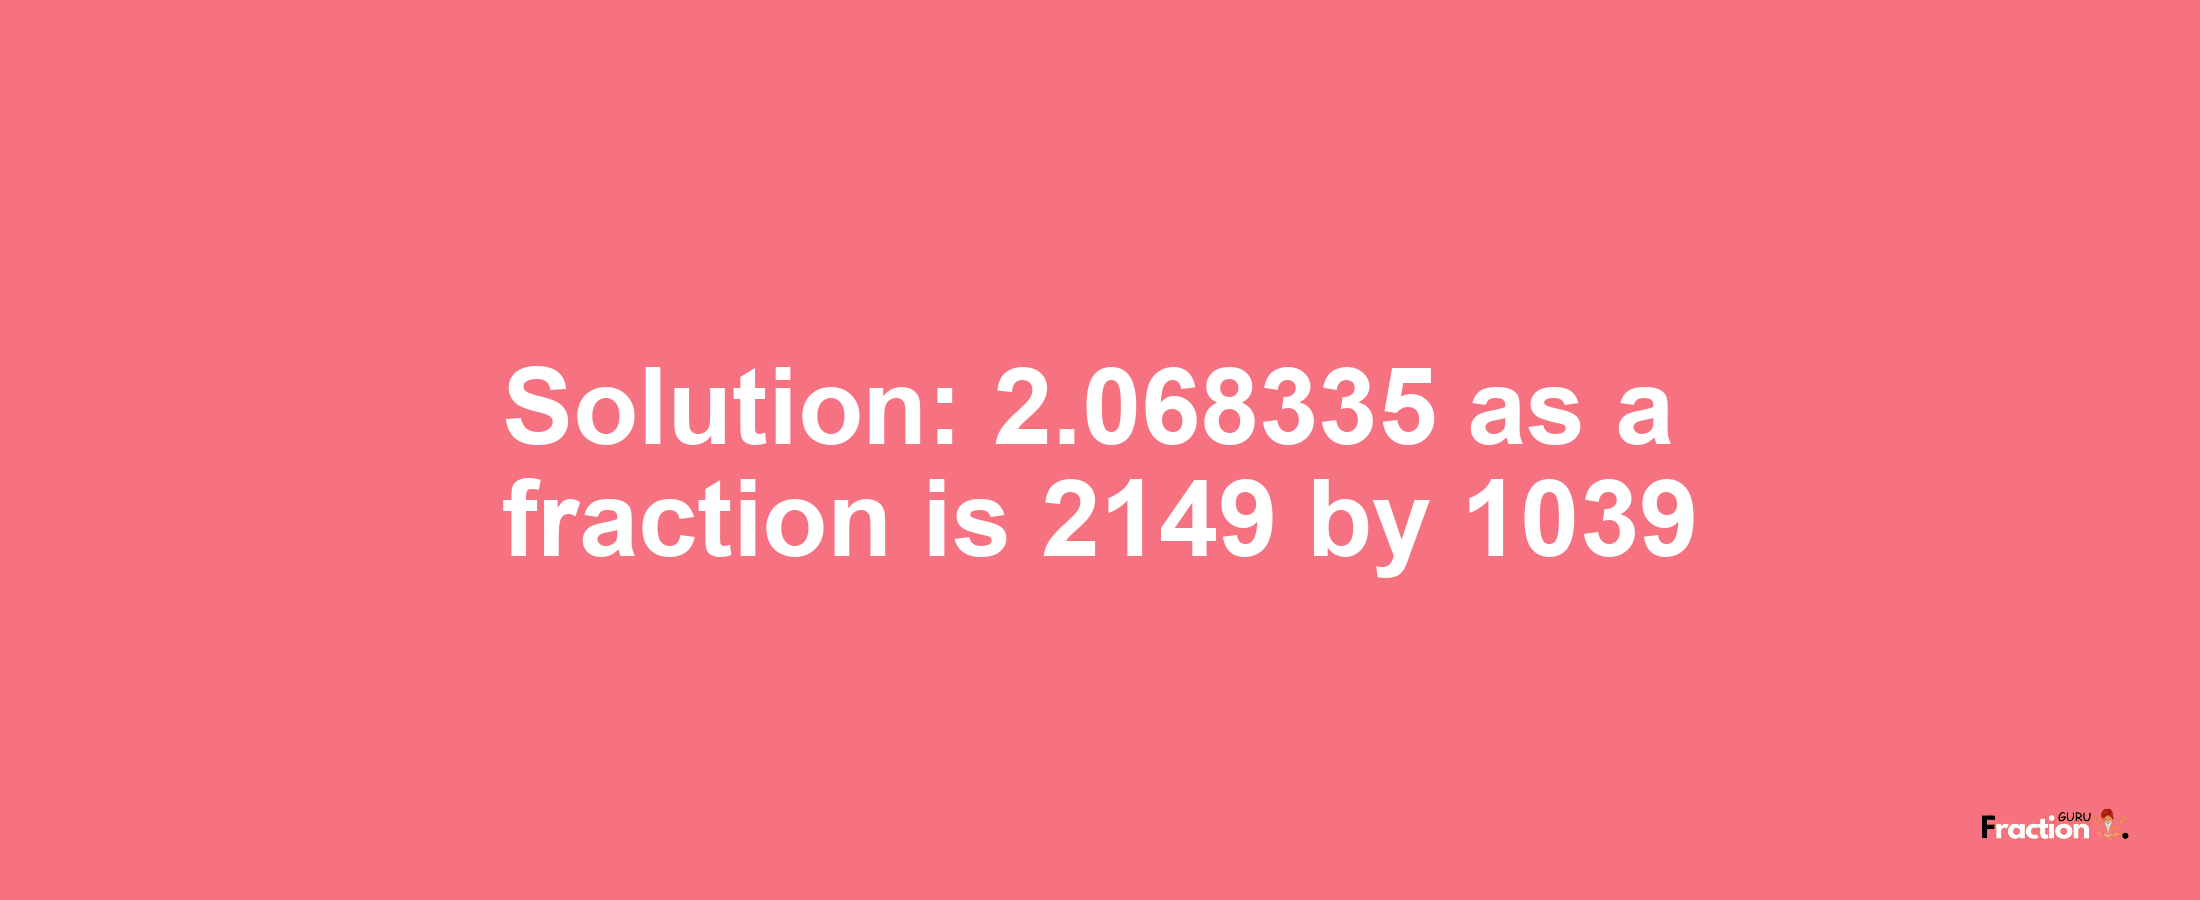 Solution:2.068335 as a fraction is 2149/1039